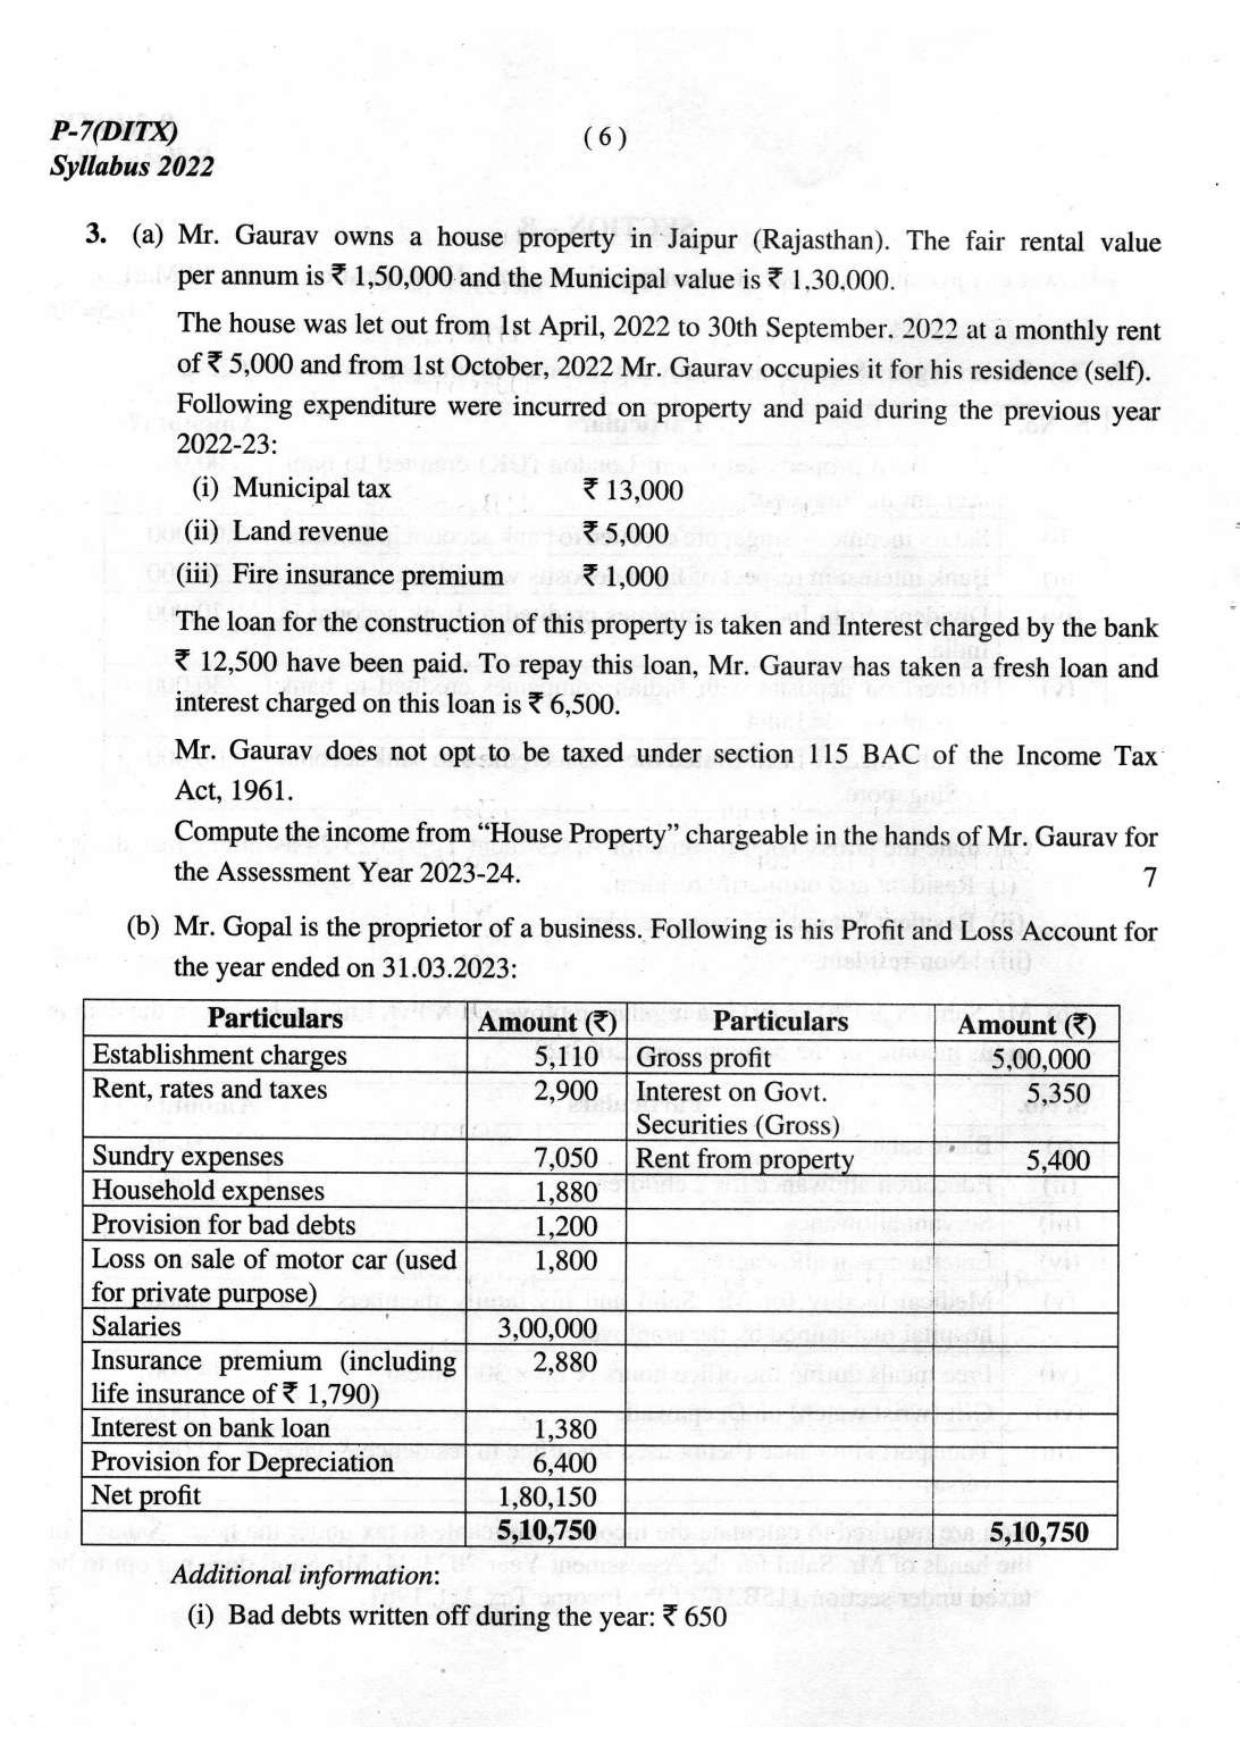 ICMAI Intermediate December 2023 Question Paper - Direct And Indirect Taxation - Page 6